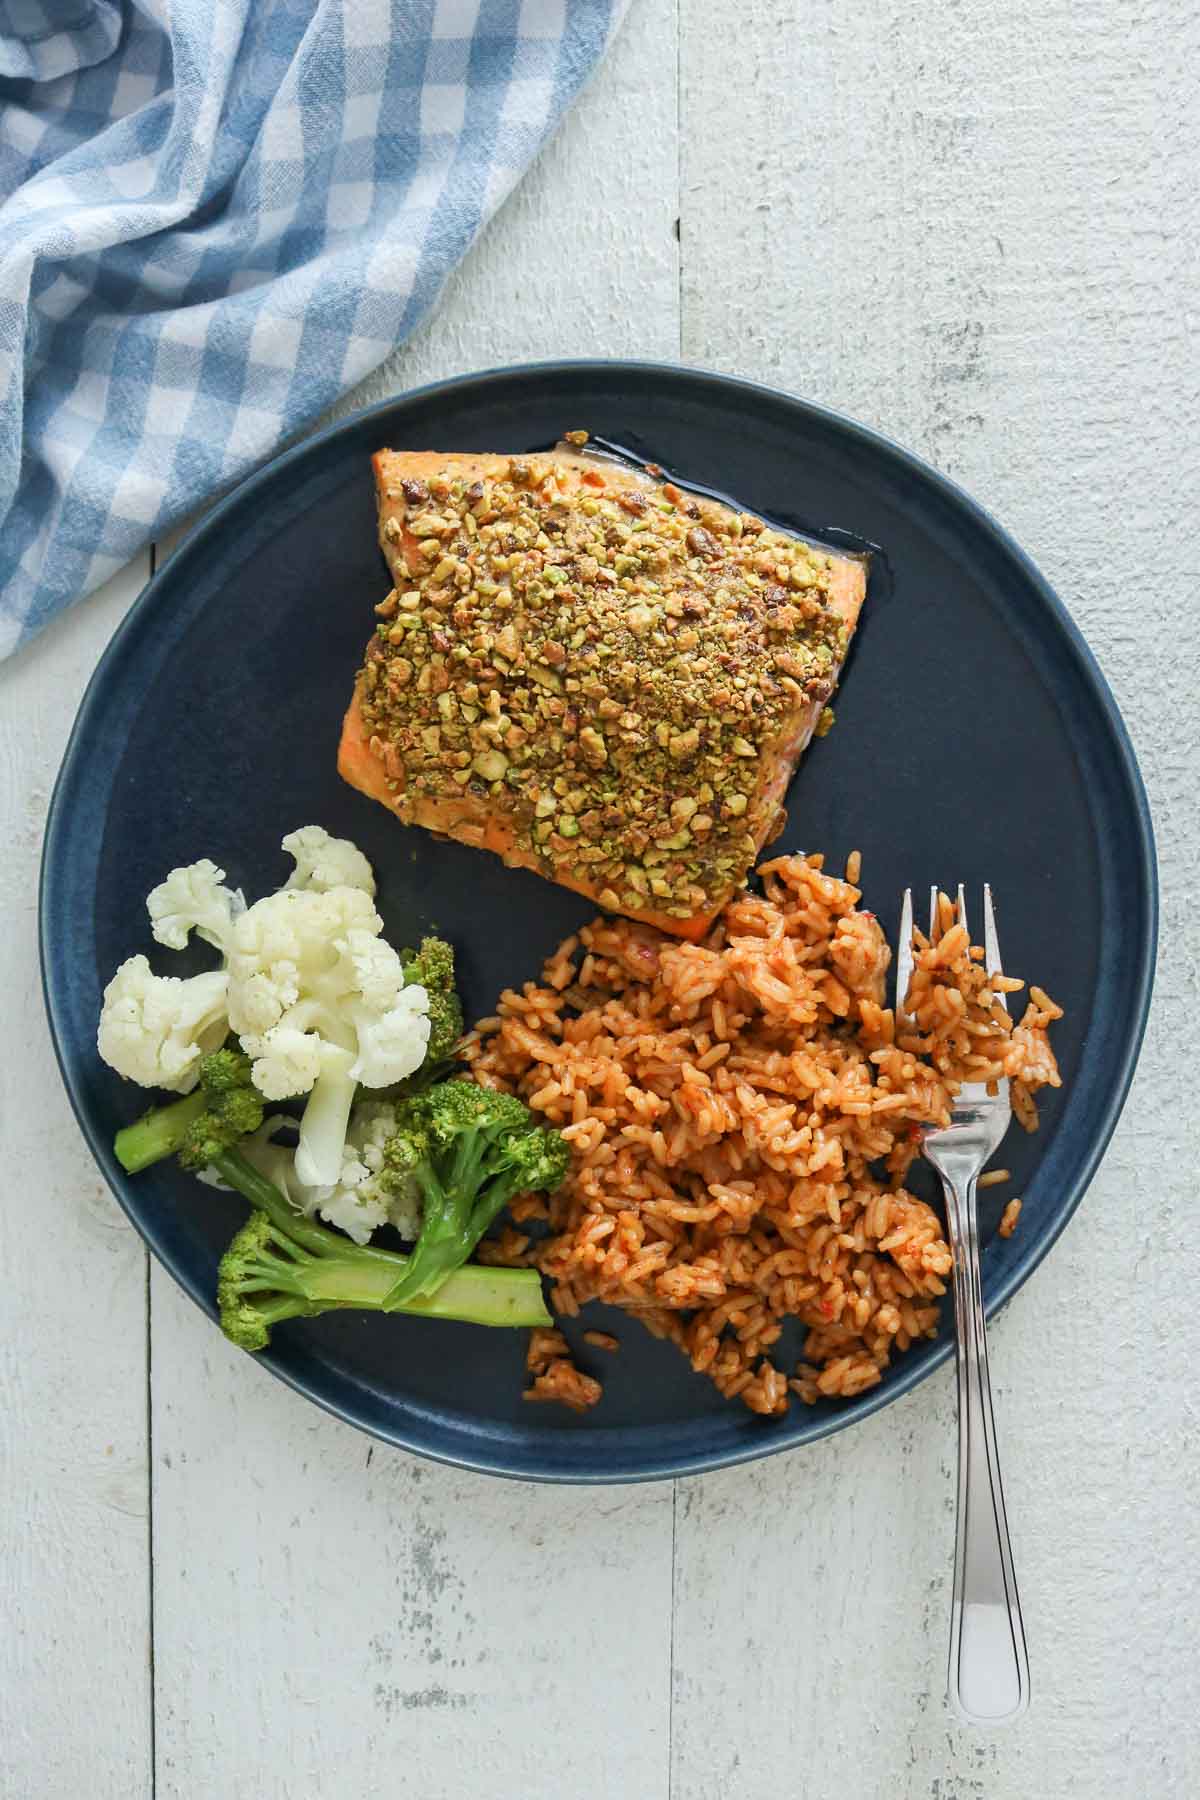 Baked pistachio-crusted arctic char fillet, rice and vegetables on a plate with a fork.